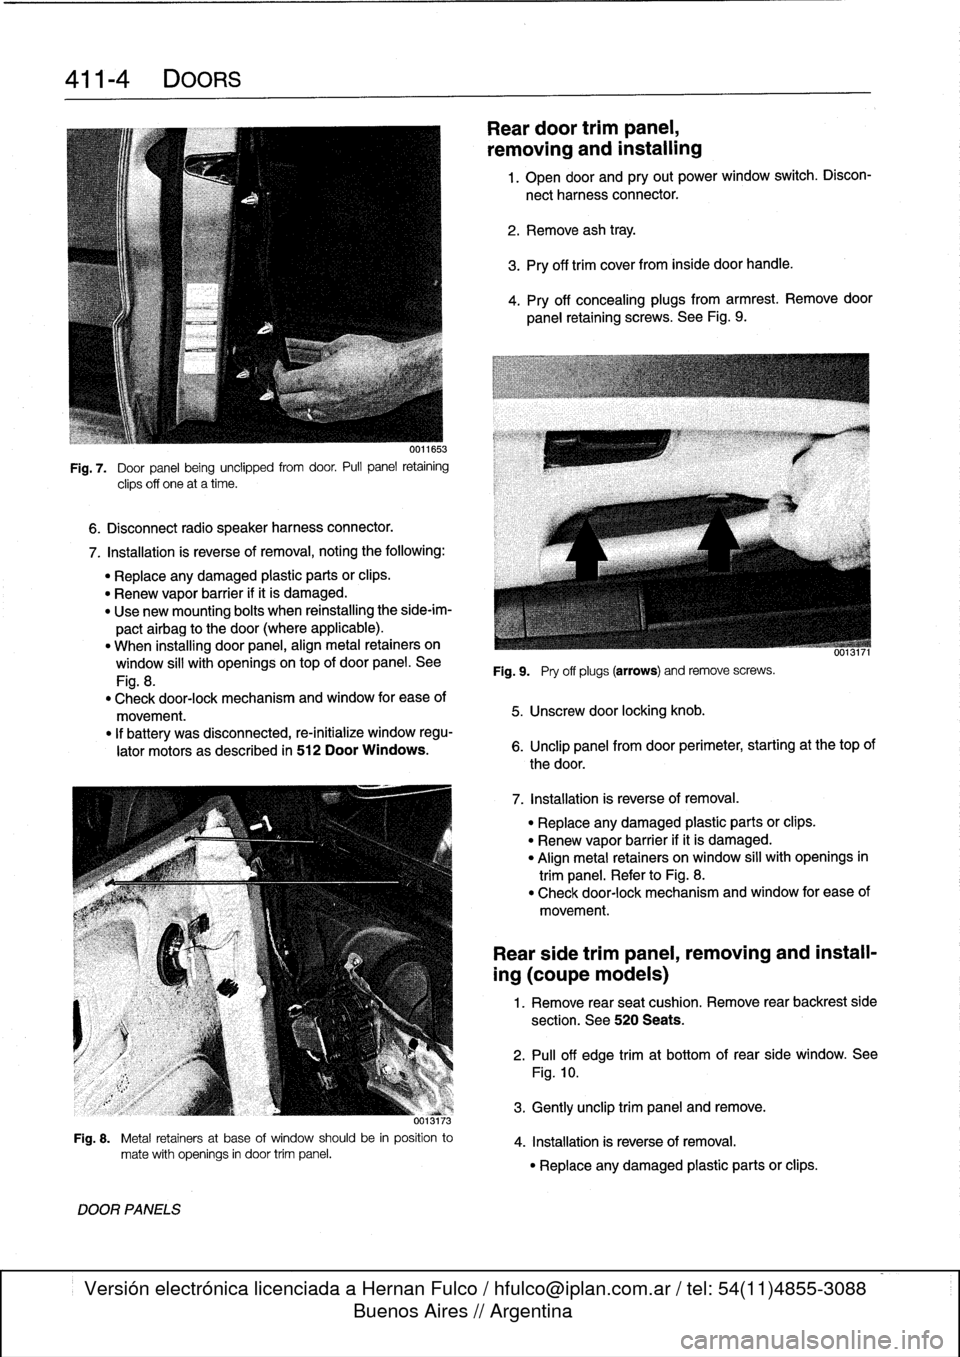 BMW 323i 1997 E36 Workshop Manual 
411-
4
DOORS

6
.
Disconnect
radio
speaker
harness
connector
.

Fig
.
7
.

	

Door
panel
being
unclipped
from
door
.
Pull
panel
retaining

clips
off
one
at
a
time
.

7
.
Installation
is
reverse
of
re